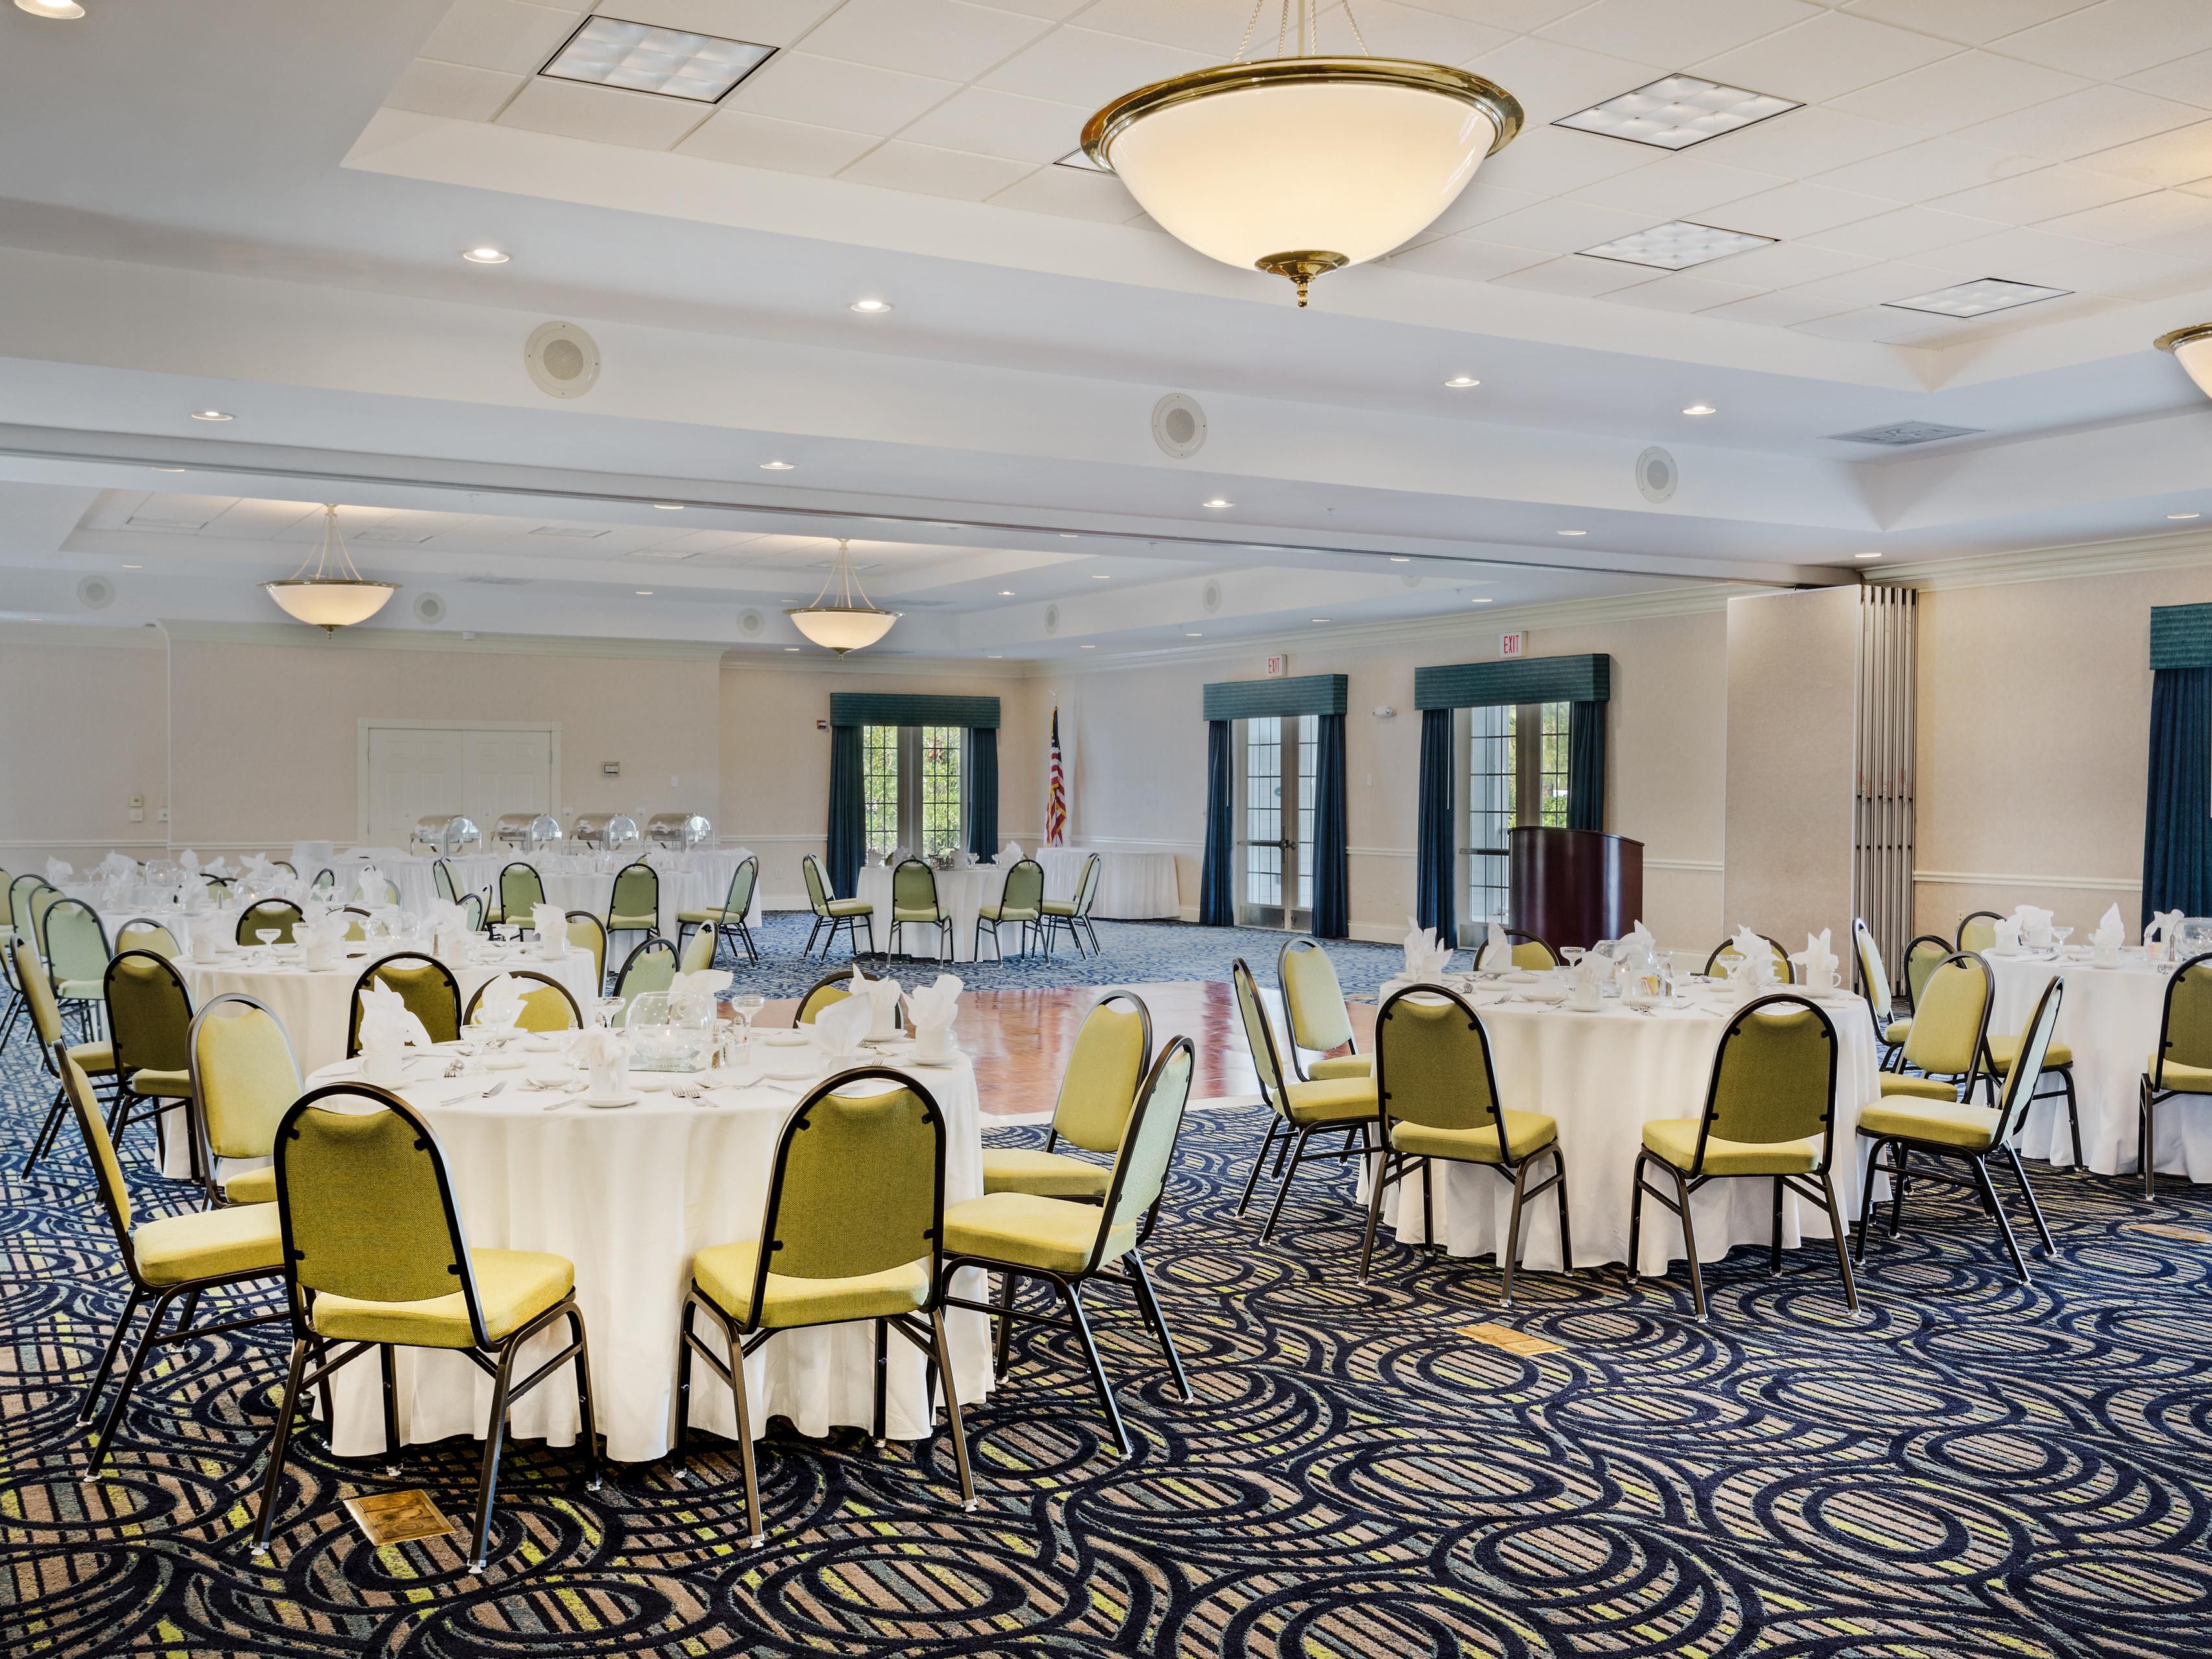 You will appreciate the ease of planning a wedding or event with one of our friendly and professional team members. Our property has event facilities for up to 250 guests and destination wedding packages. Our competitive banquet menu pricing and over 8,000 sq feet of event space are just the start of the exceptional service you will receive